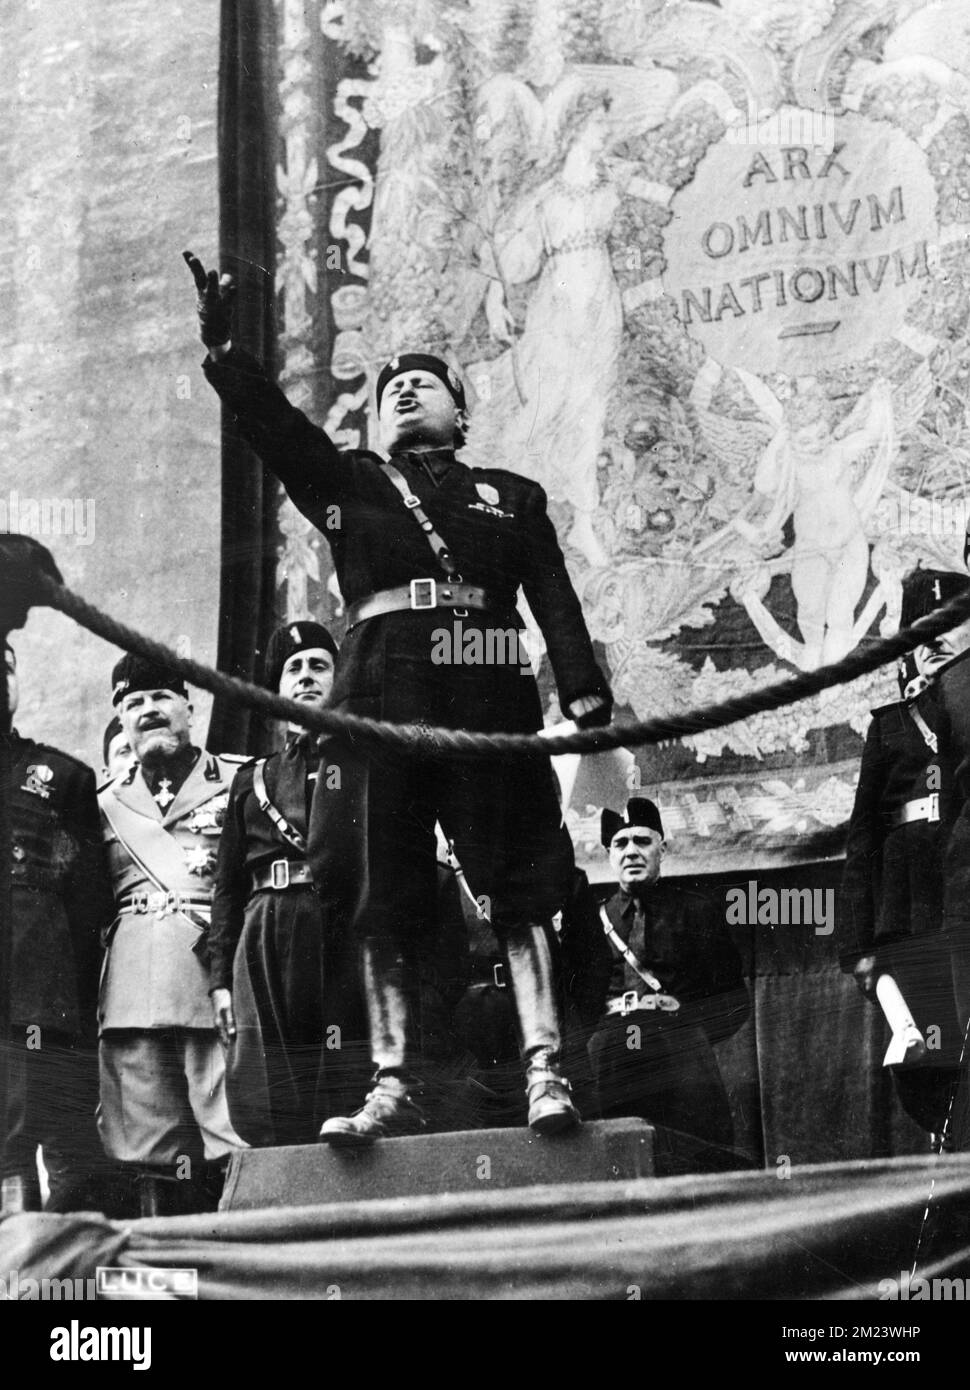 Mussolini, Benito Mussolini, Benito Amilcare Andrea Mussolini (1883 – 1945) Italian politician who founded and led the National Fascist Party. He was Prime Minister of Italy from 1922 until his deposition in 1943, and 'Duce' of Italian Fascism from the establishment of the Italian Fasces of Combat in 1919 until his execution in 1945 by Italian partisans. Stock Photo